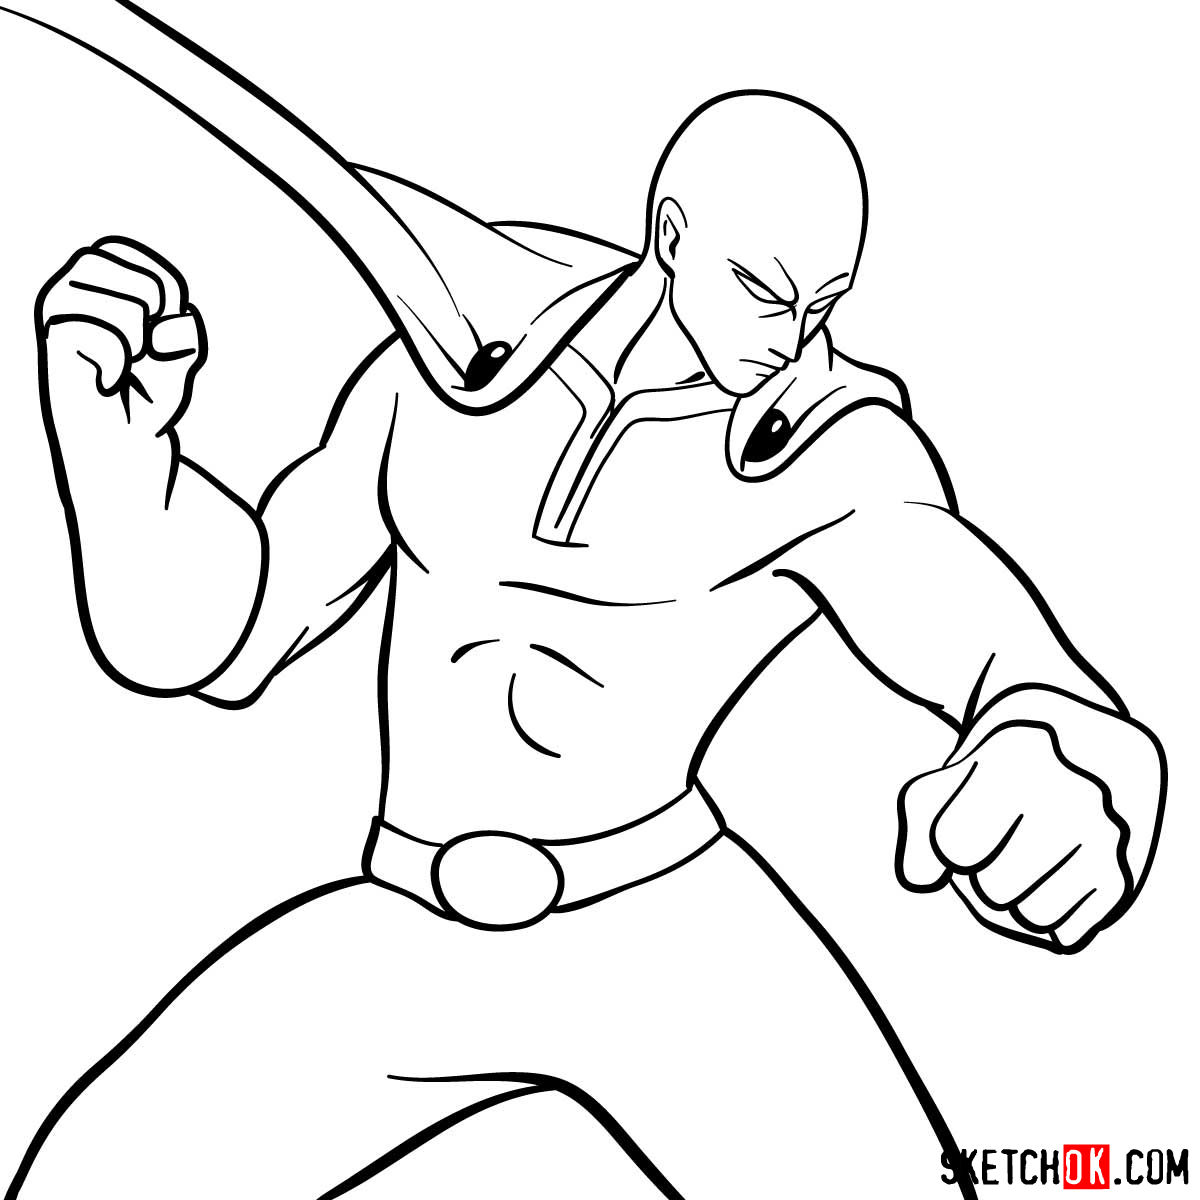 One-Punch Man Archives - Sketchok easy drawing guides